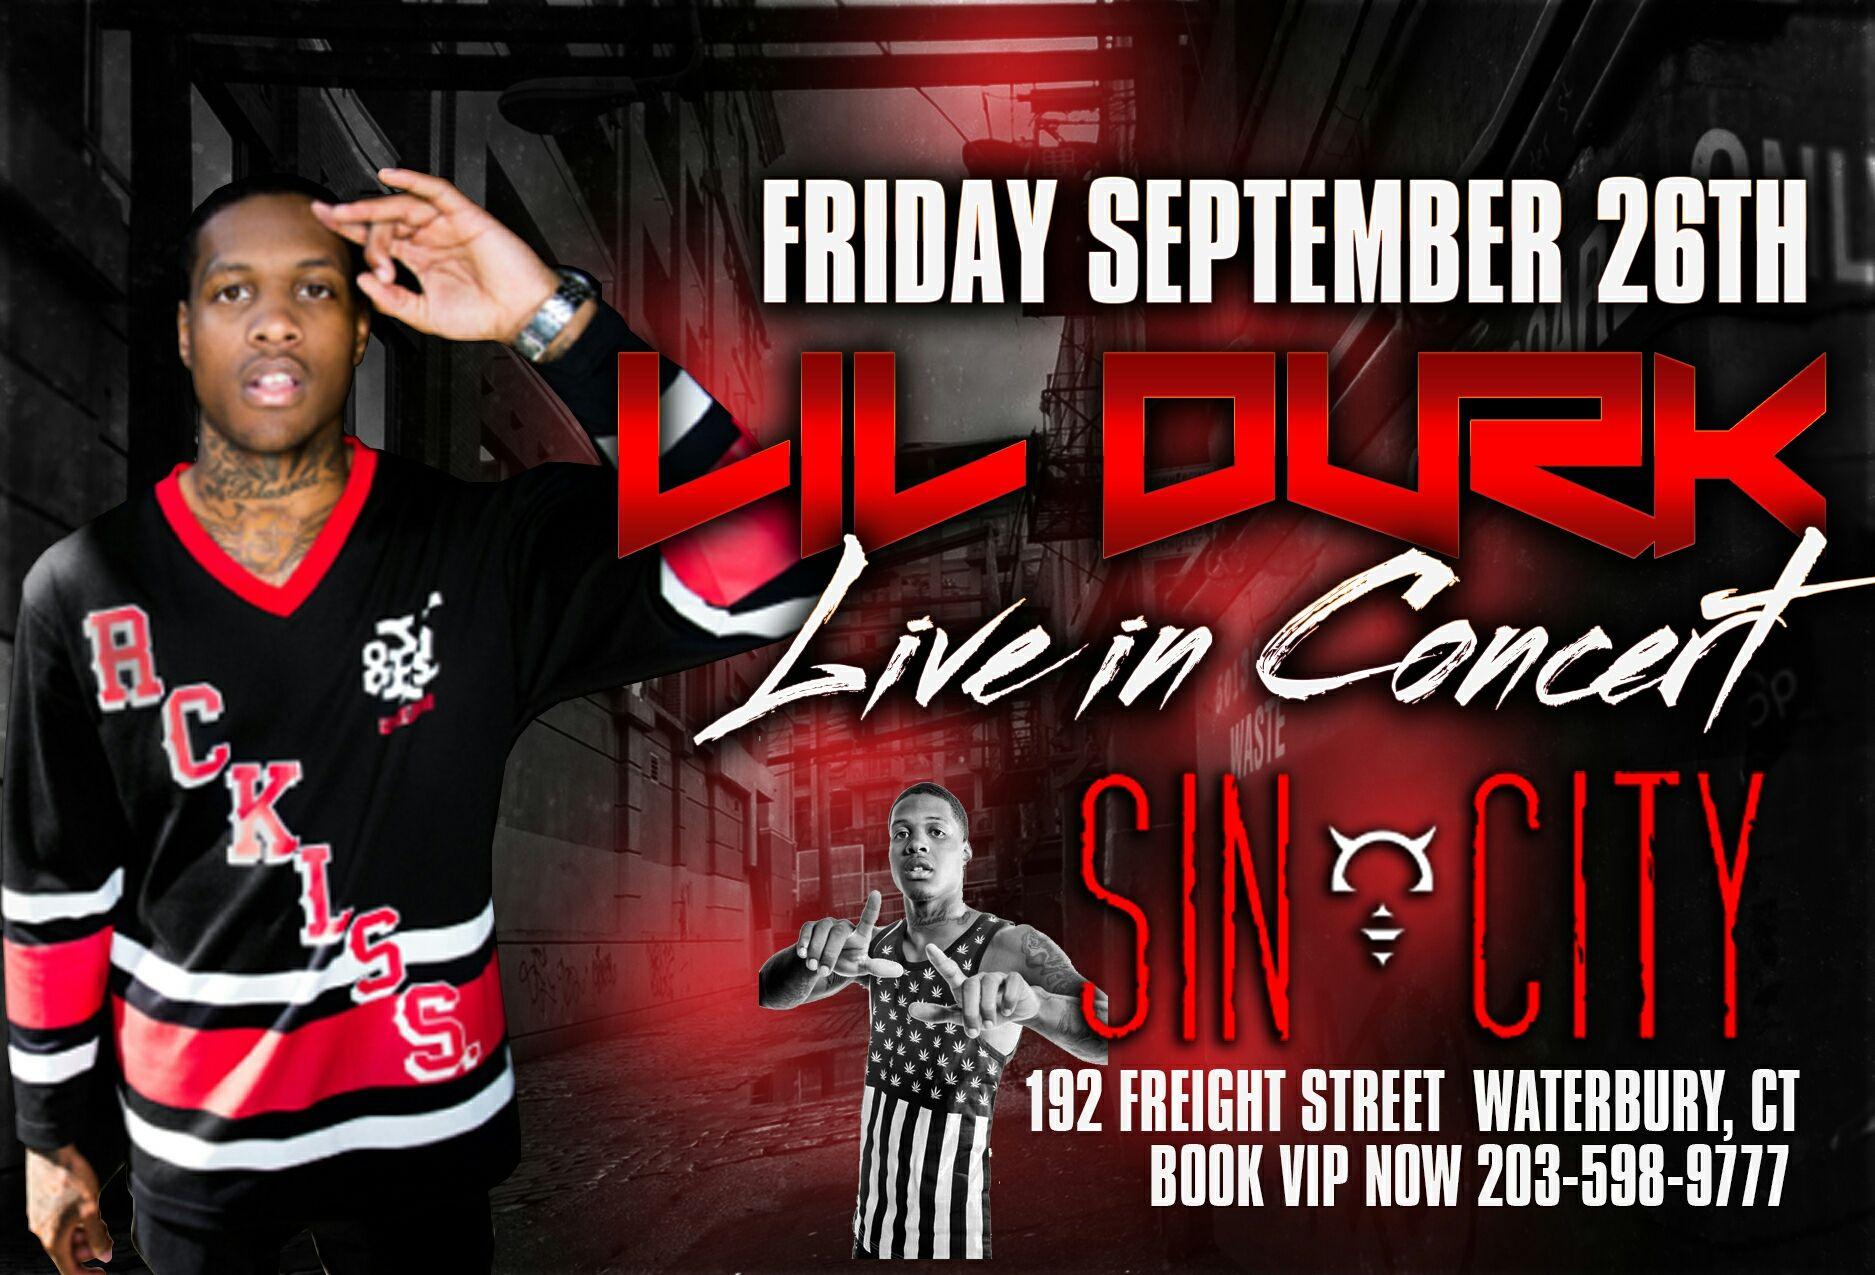 Tickets for LIL DURK LIVE AT SIN CITY in WATERBURY from ShowClix